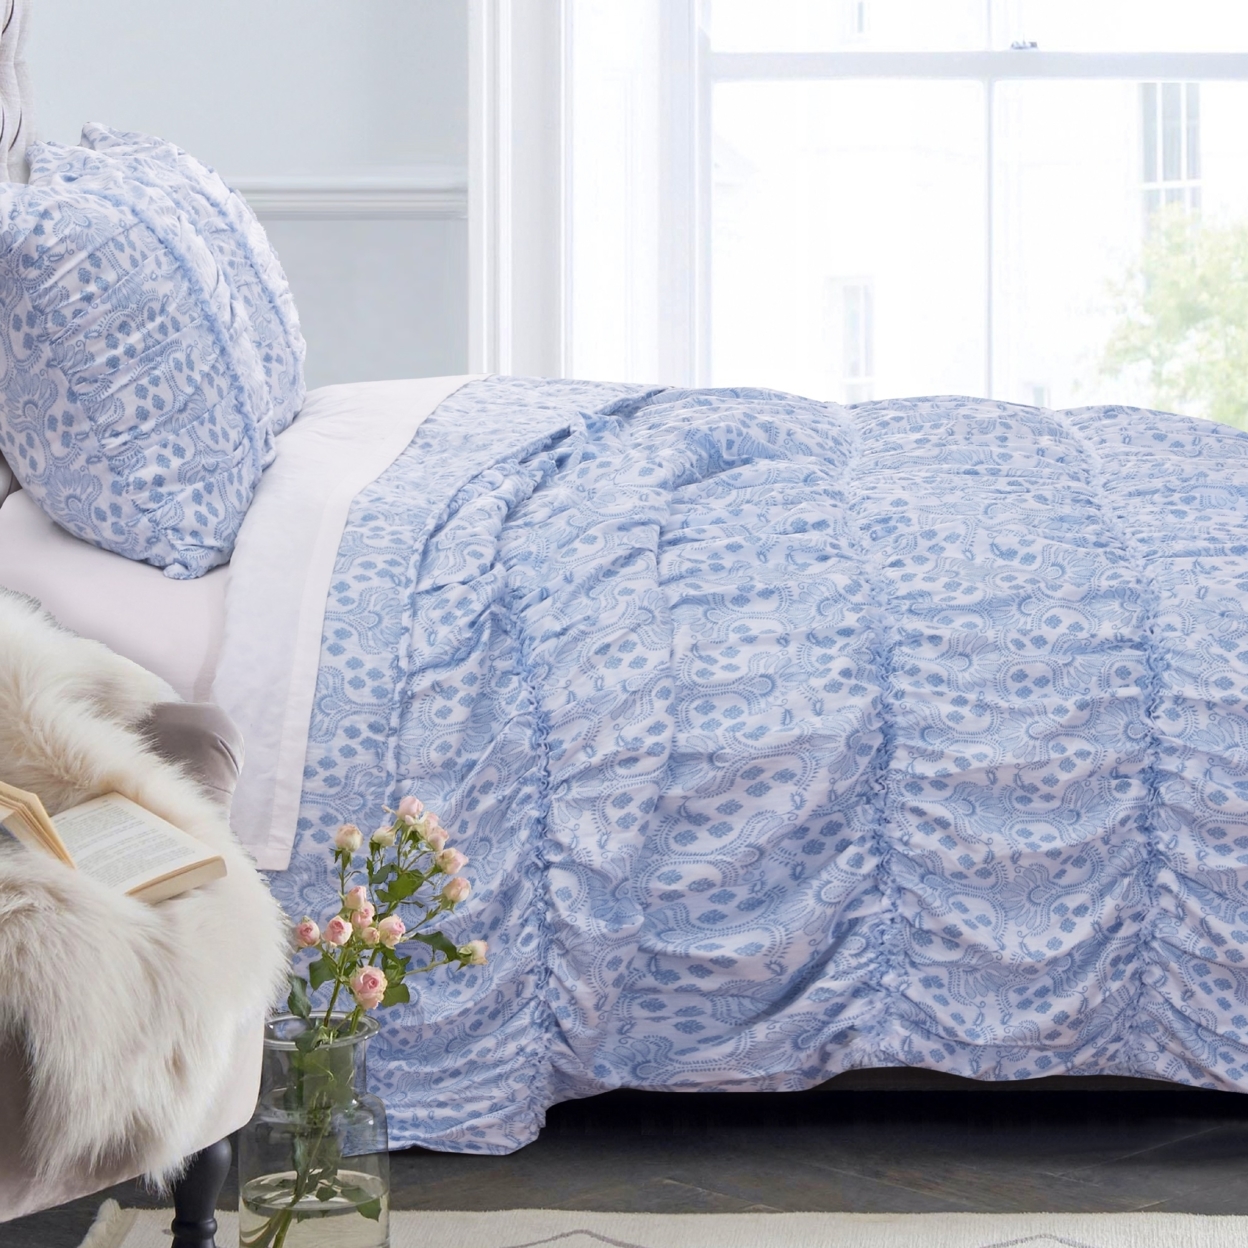 Fabric Queen Size Quilt Set With Pleated And Ruffled Details, Blue- Saltoro Sherpi